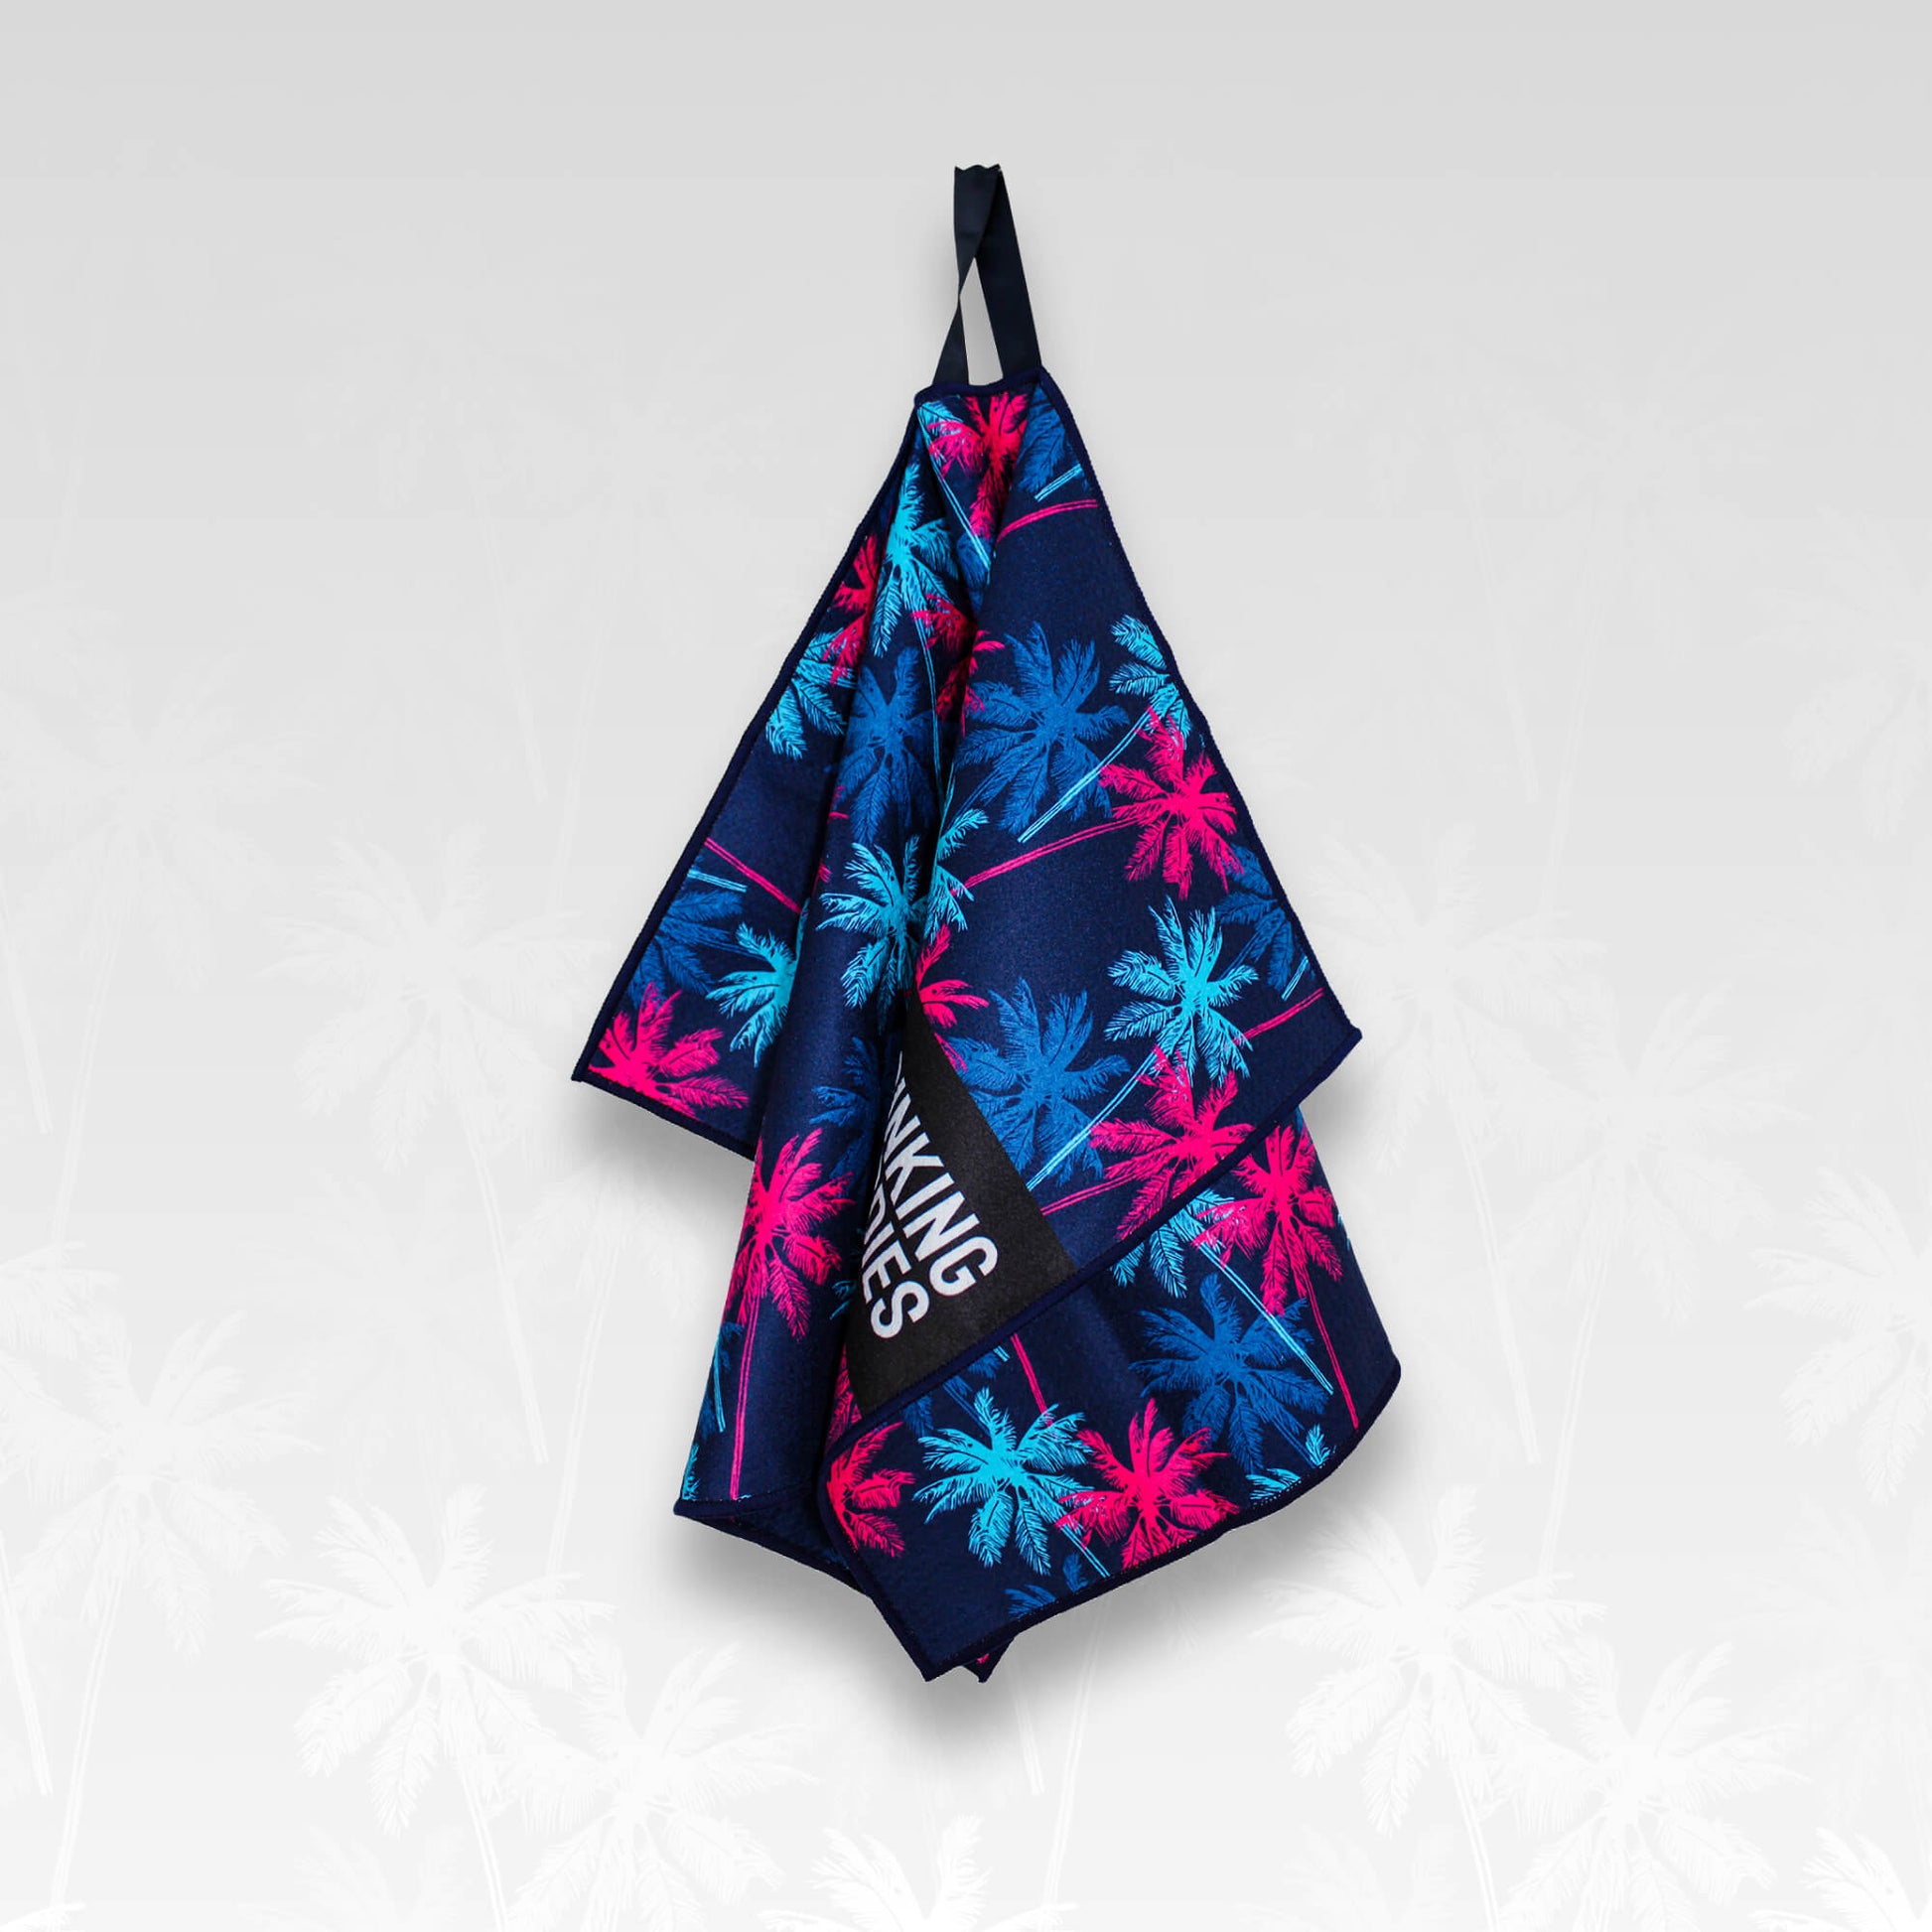 A hanging Palm tree patterned microfibre golf towel